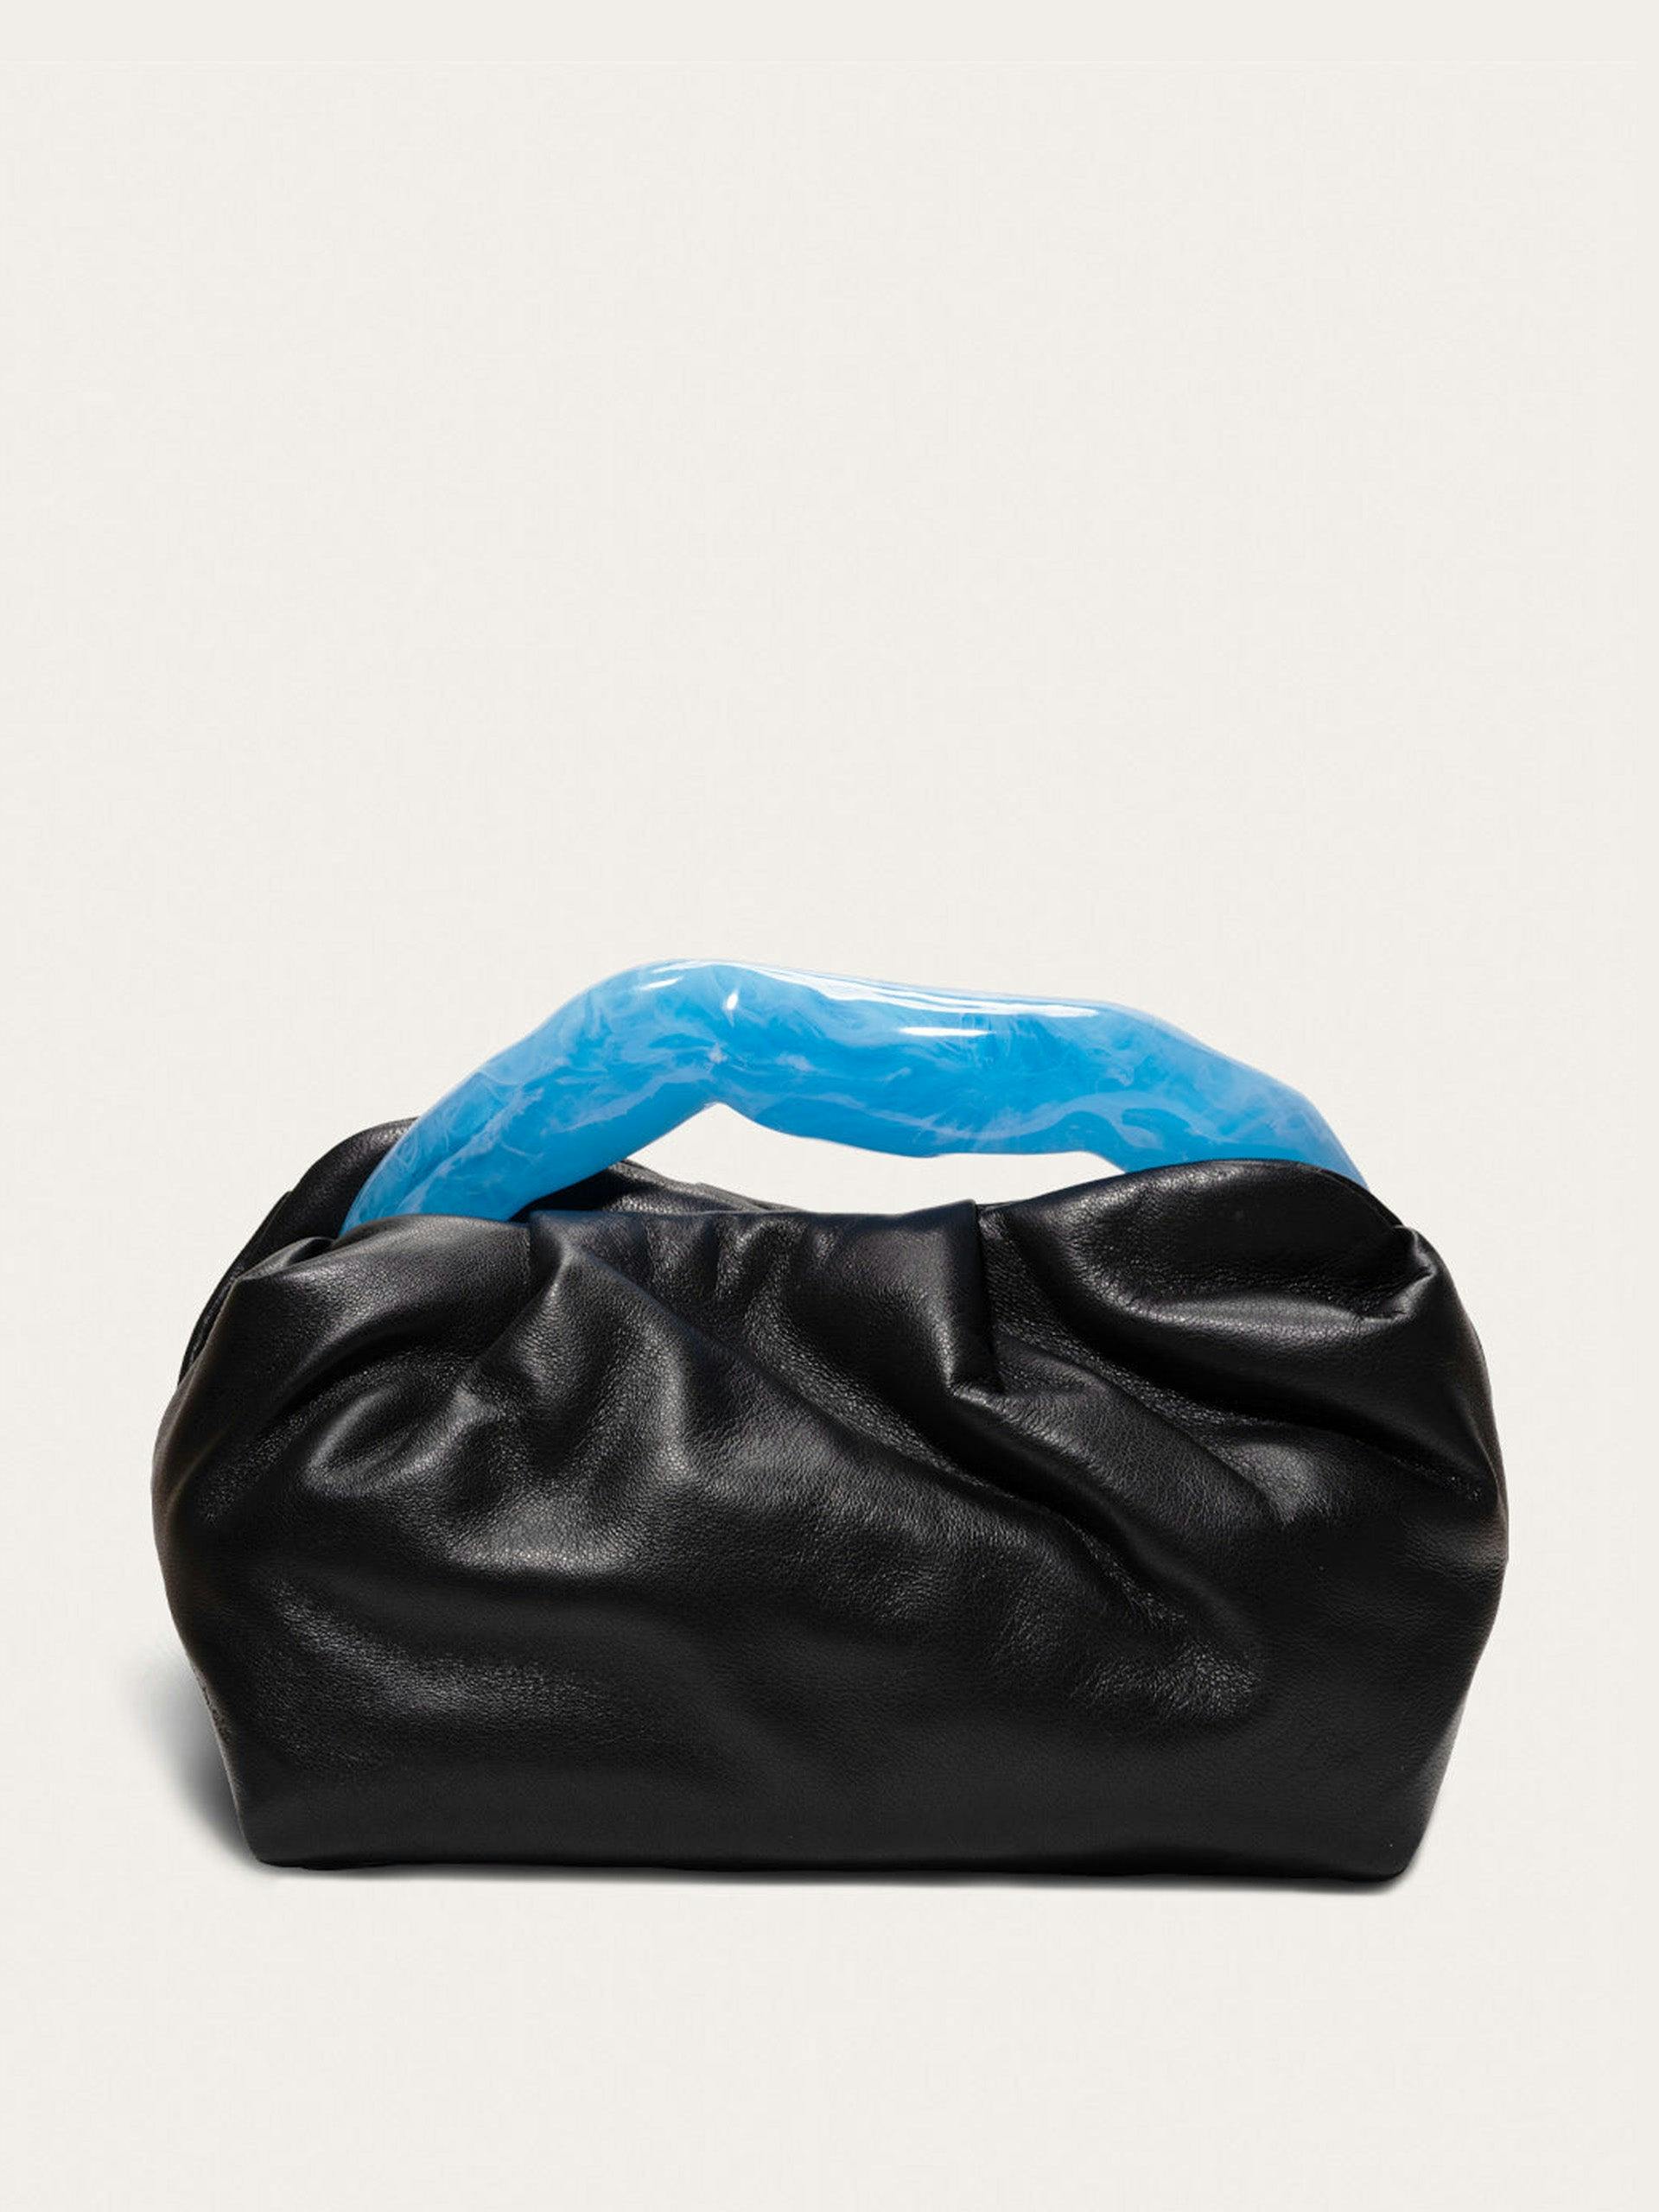 Blue resin and black leather clutch bag